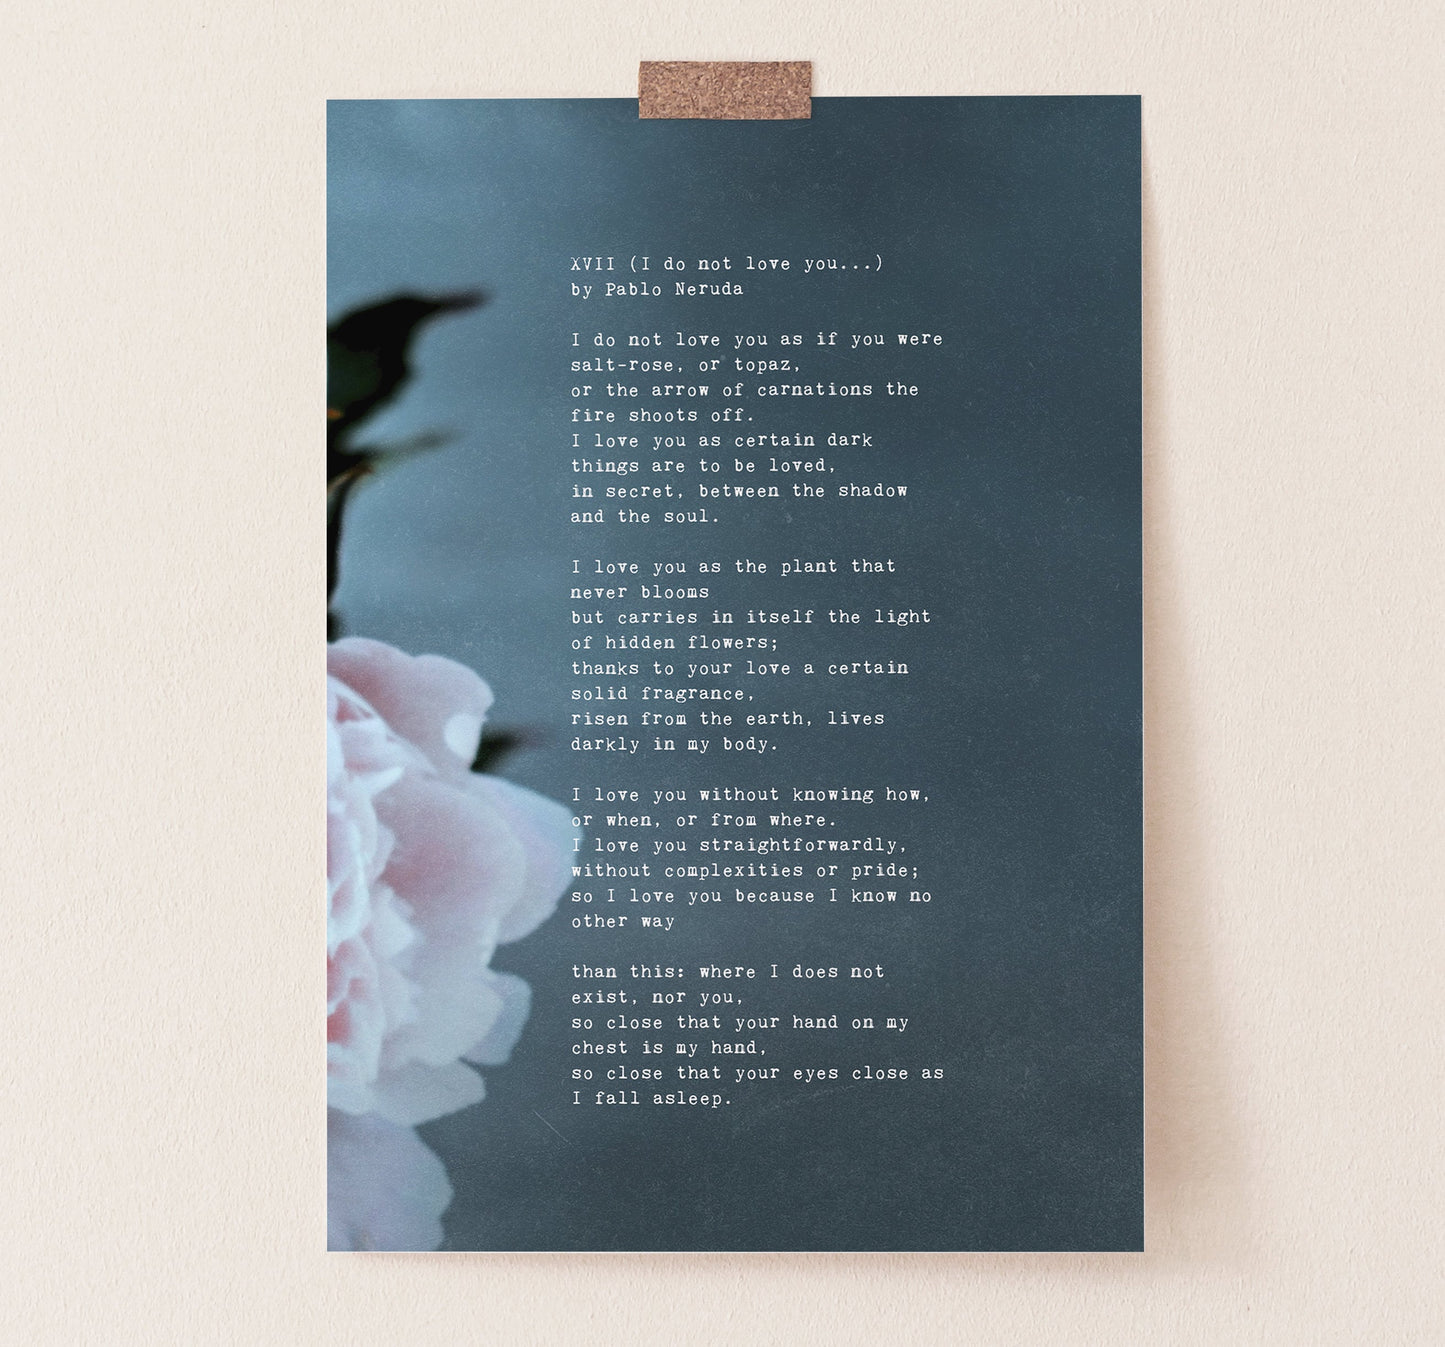 Pablo Neruda love poem wall art. "I love you as certain dark things are to be loved". Gift for significant other.